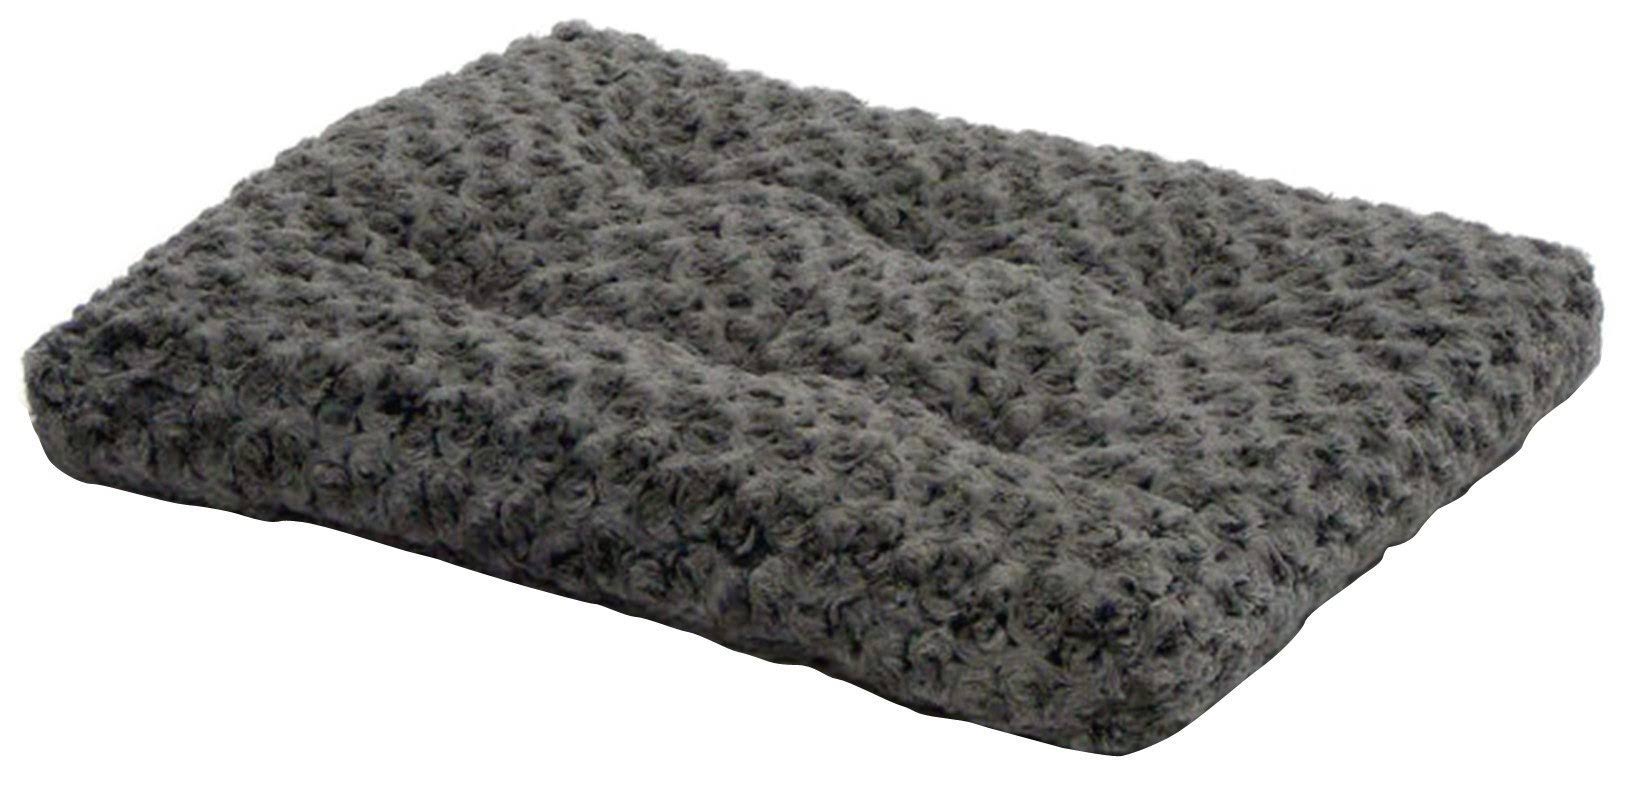 MidWest Quiet Time Pet Bed Deluxe - Gray Ombre Swirl